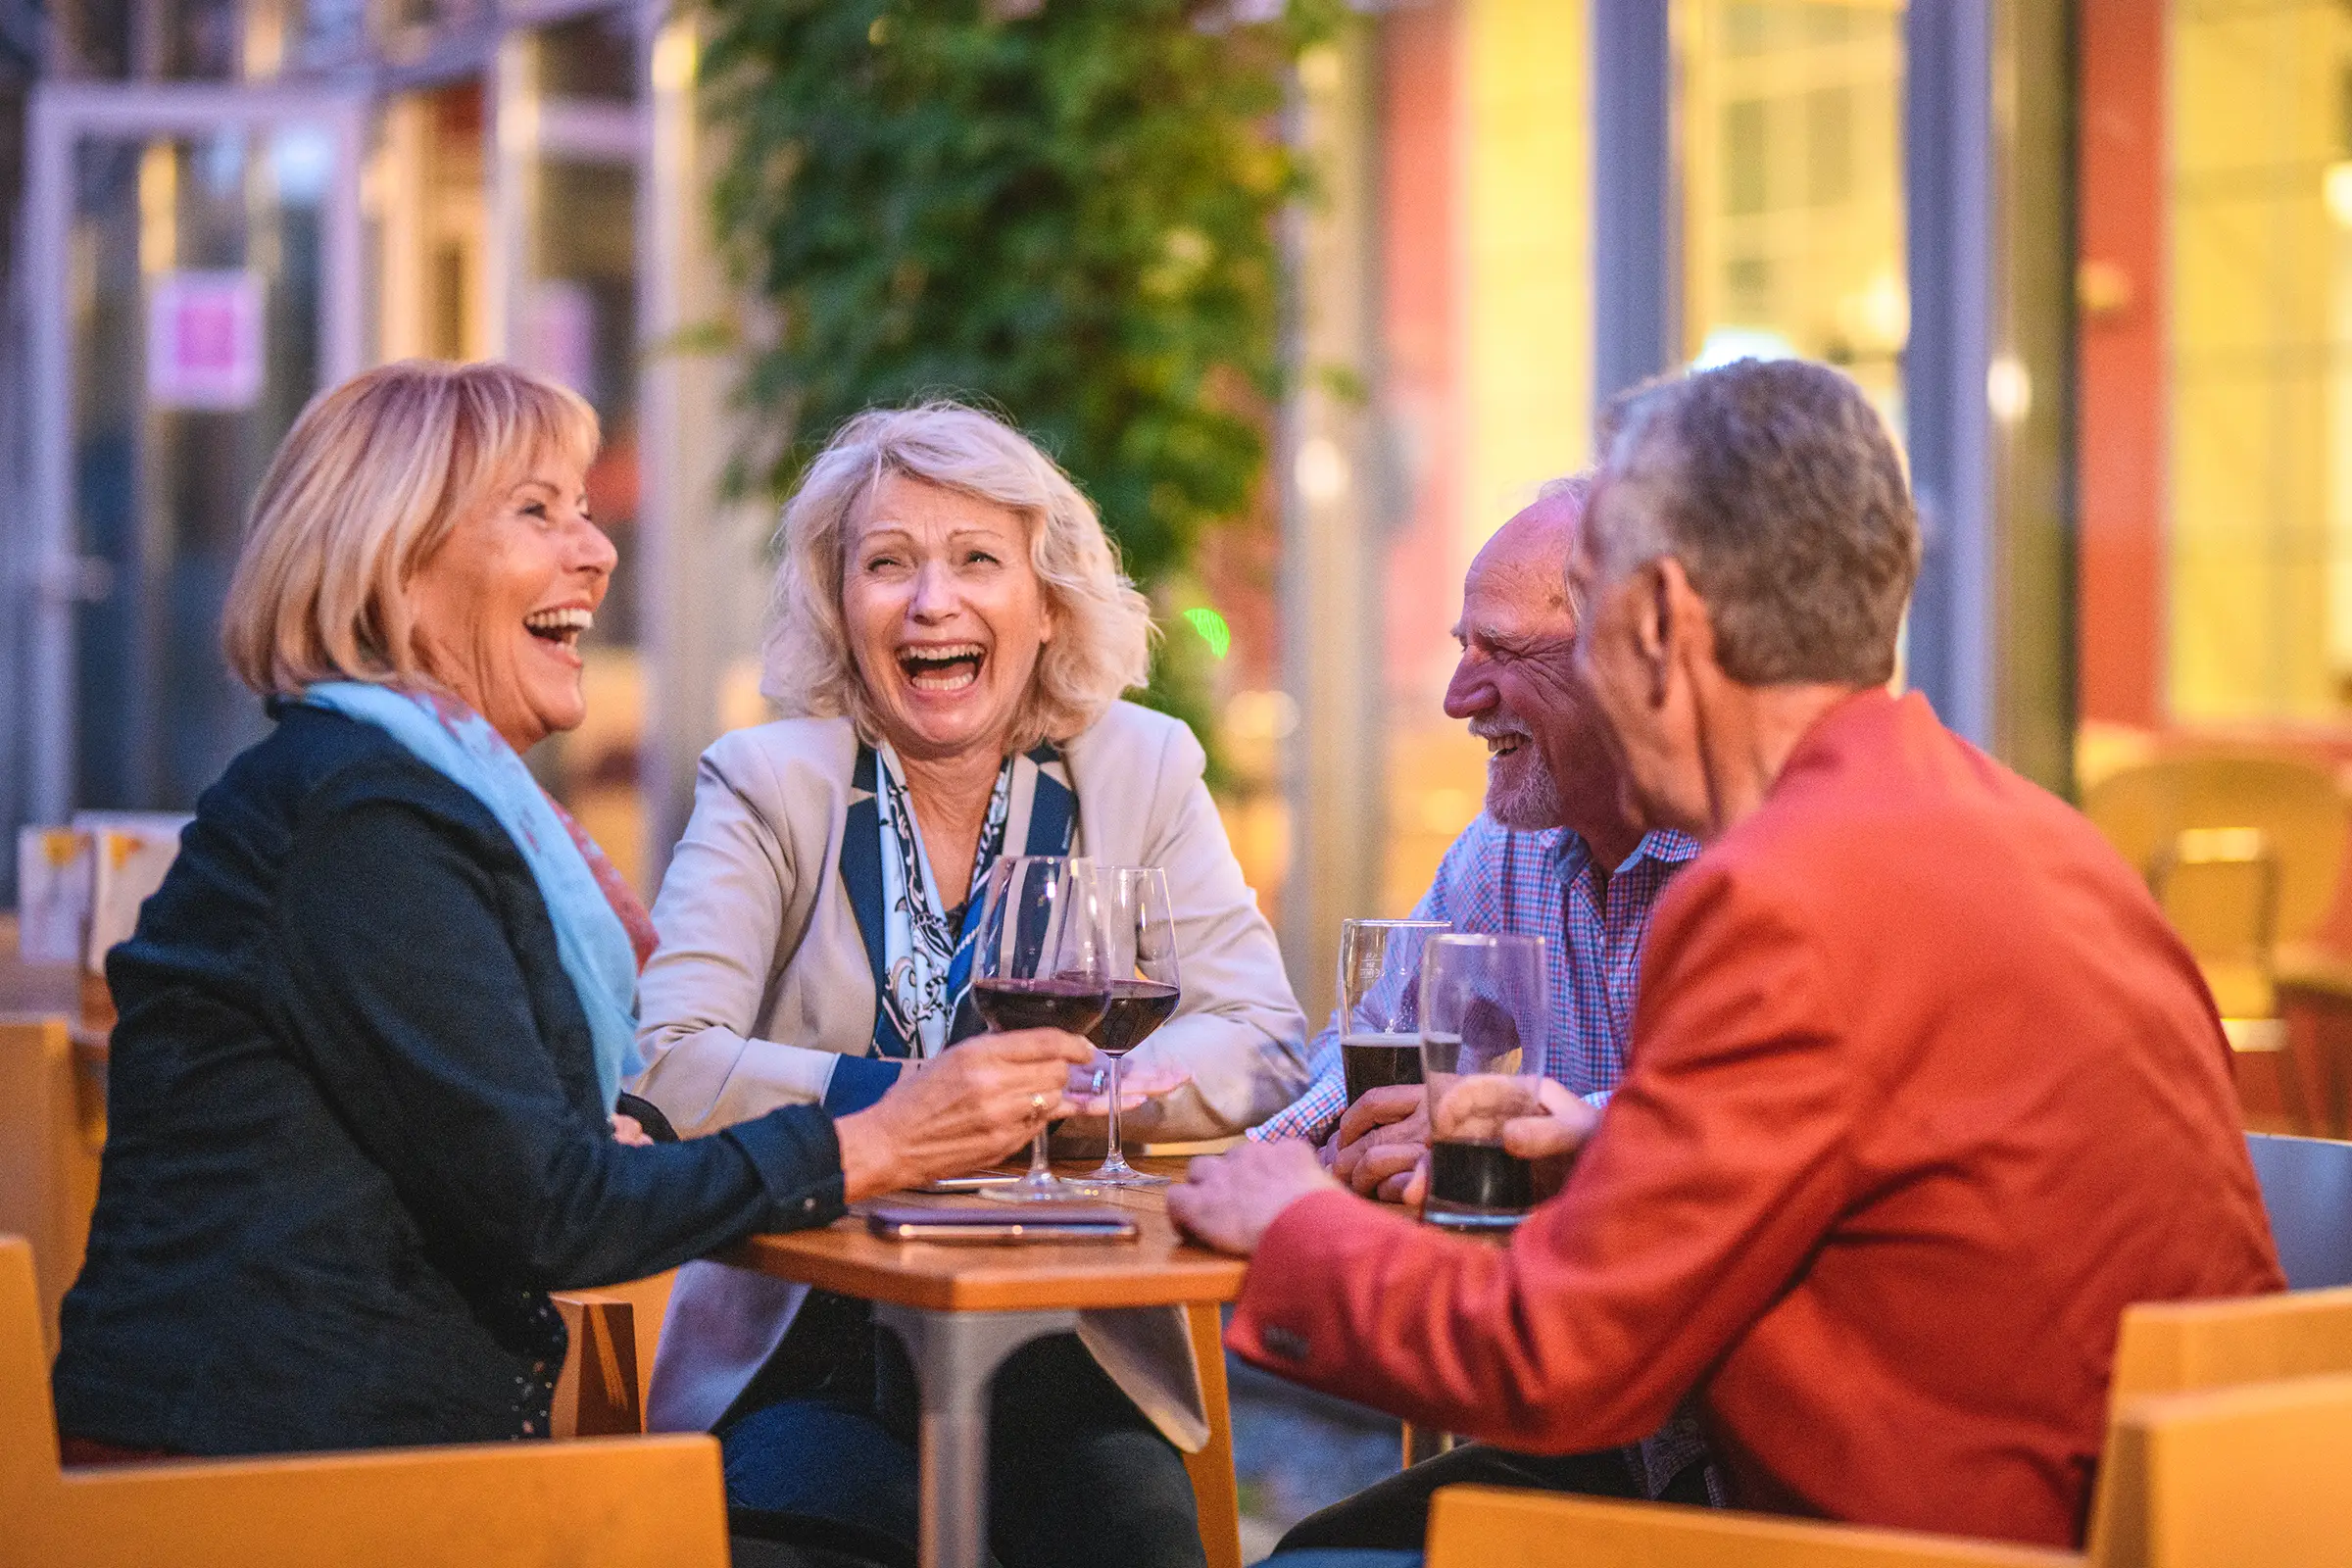 two senior couples enjoying time together at a table outside